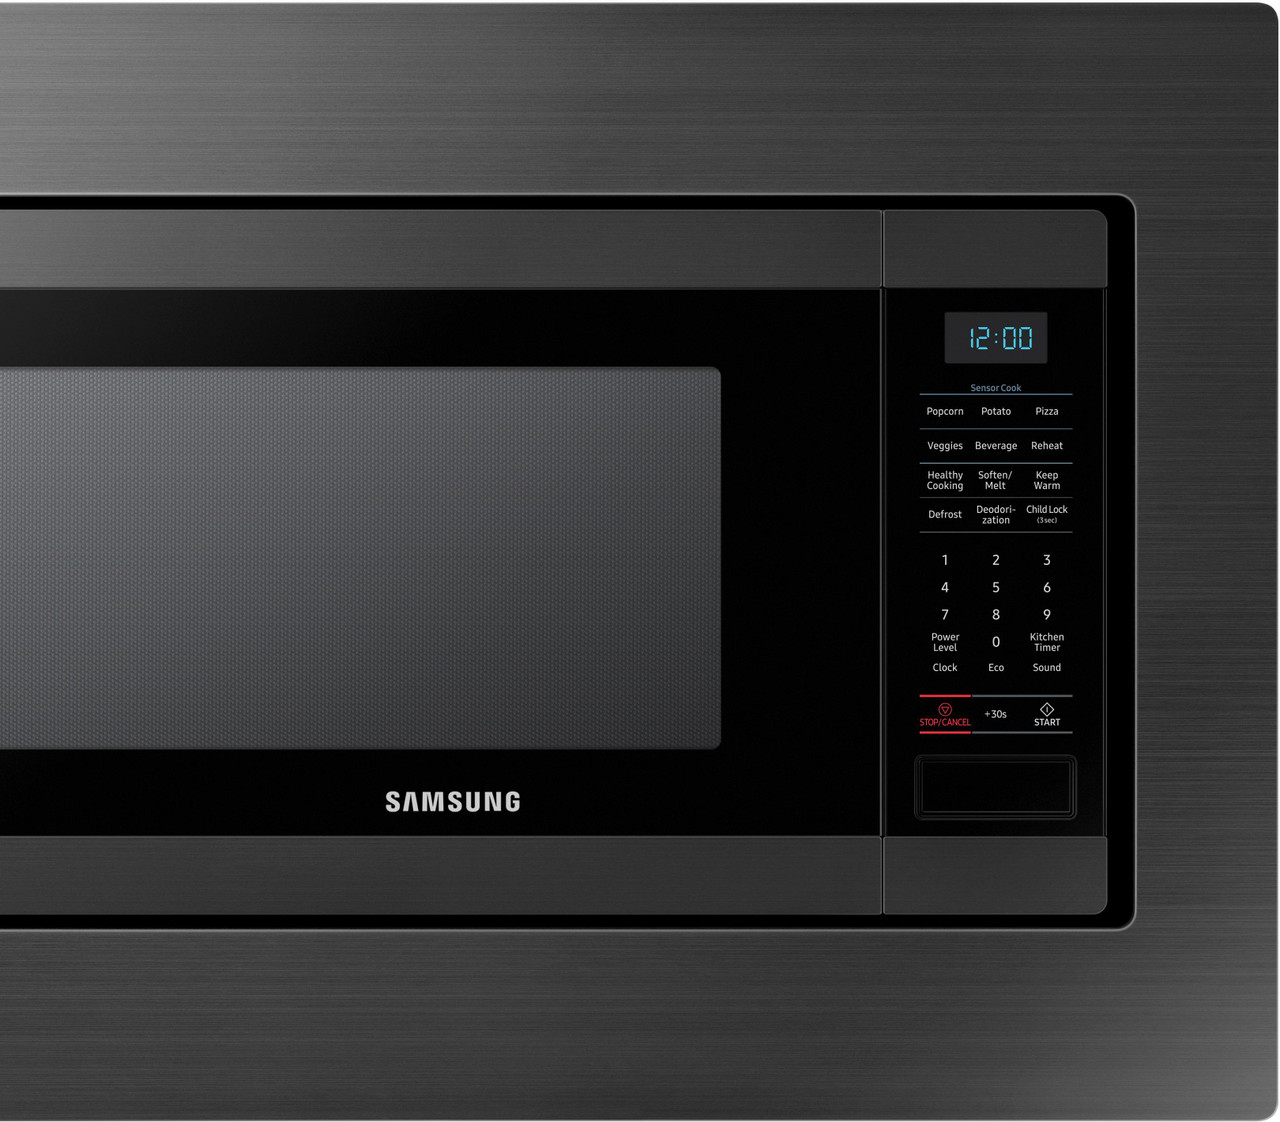 Samsung - 30" Trim Kit for Samsung MS19M8020TG Microwave - Fingerprint Resistant - Fingerprint Resistant Black Stainless Steel